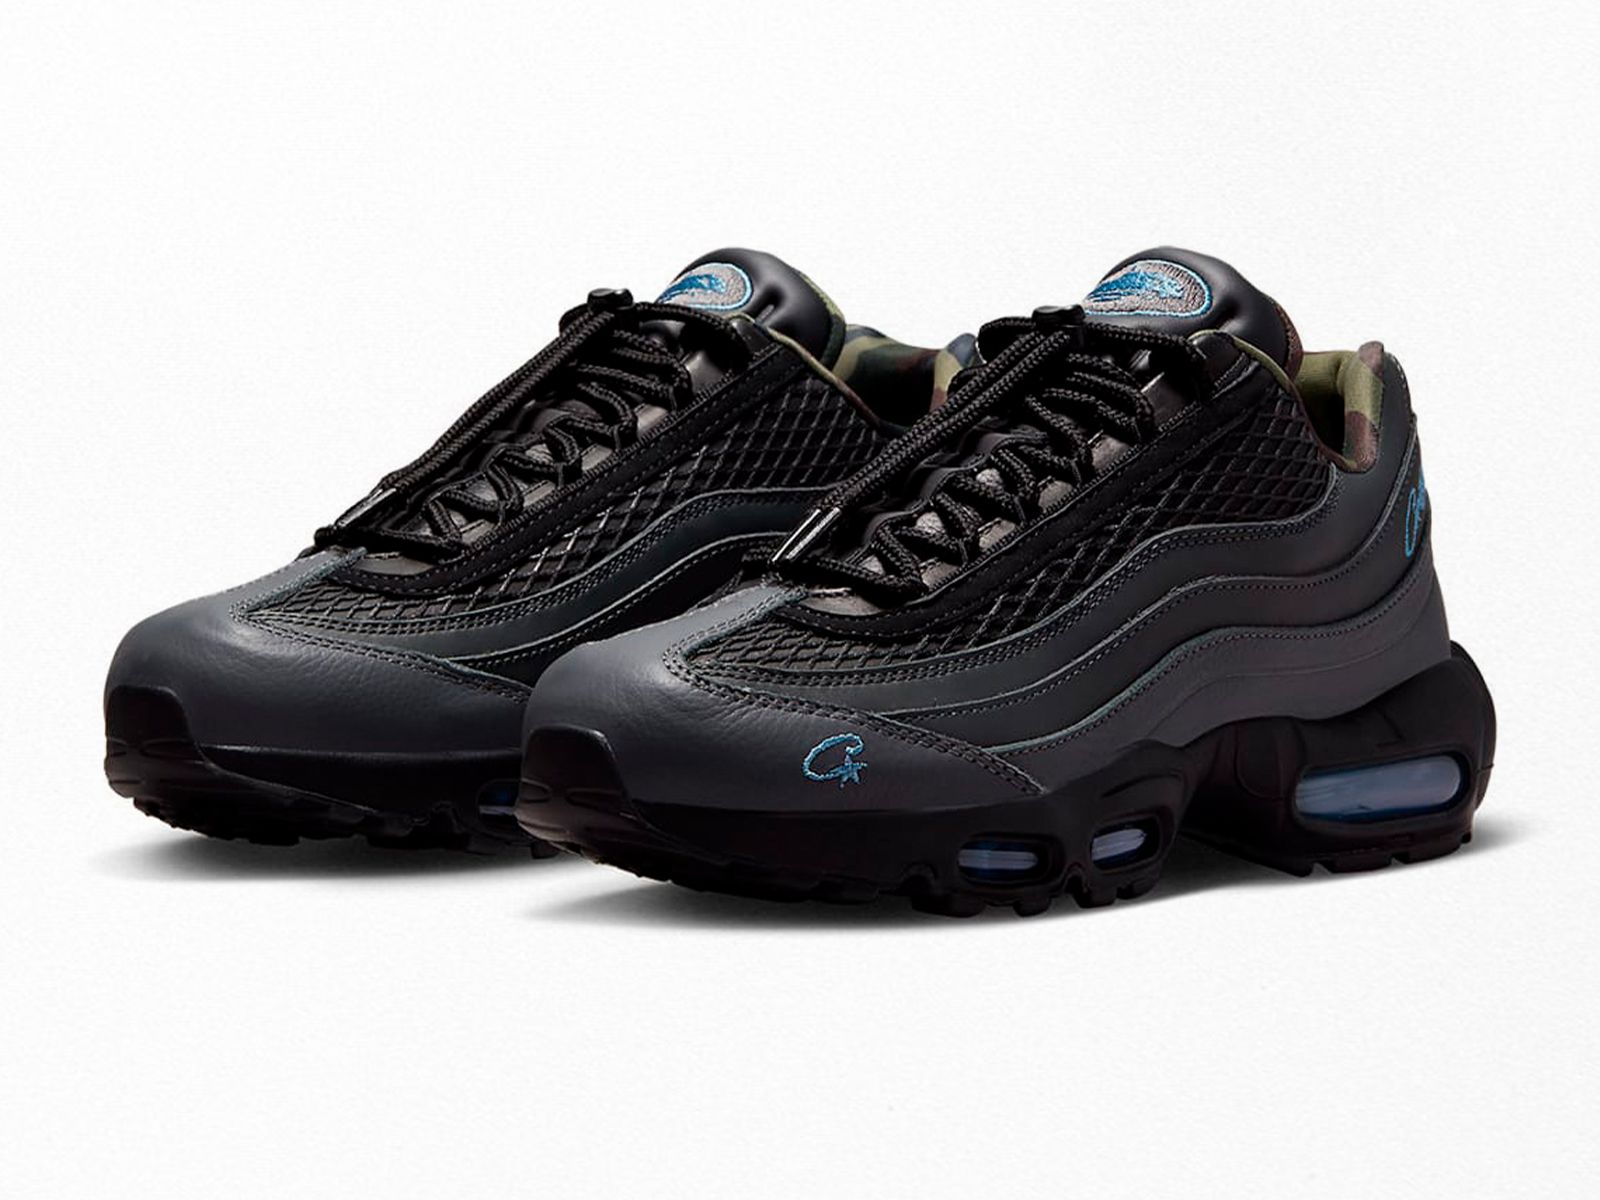 Corteiz introduces a new iteration to its Nike Air Max 95 collection